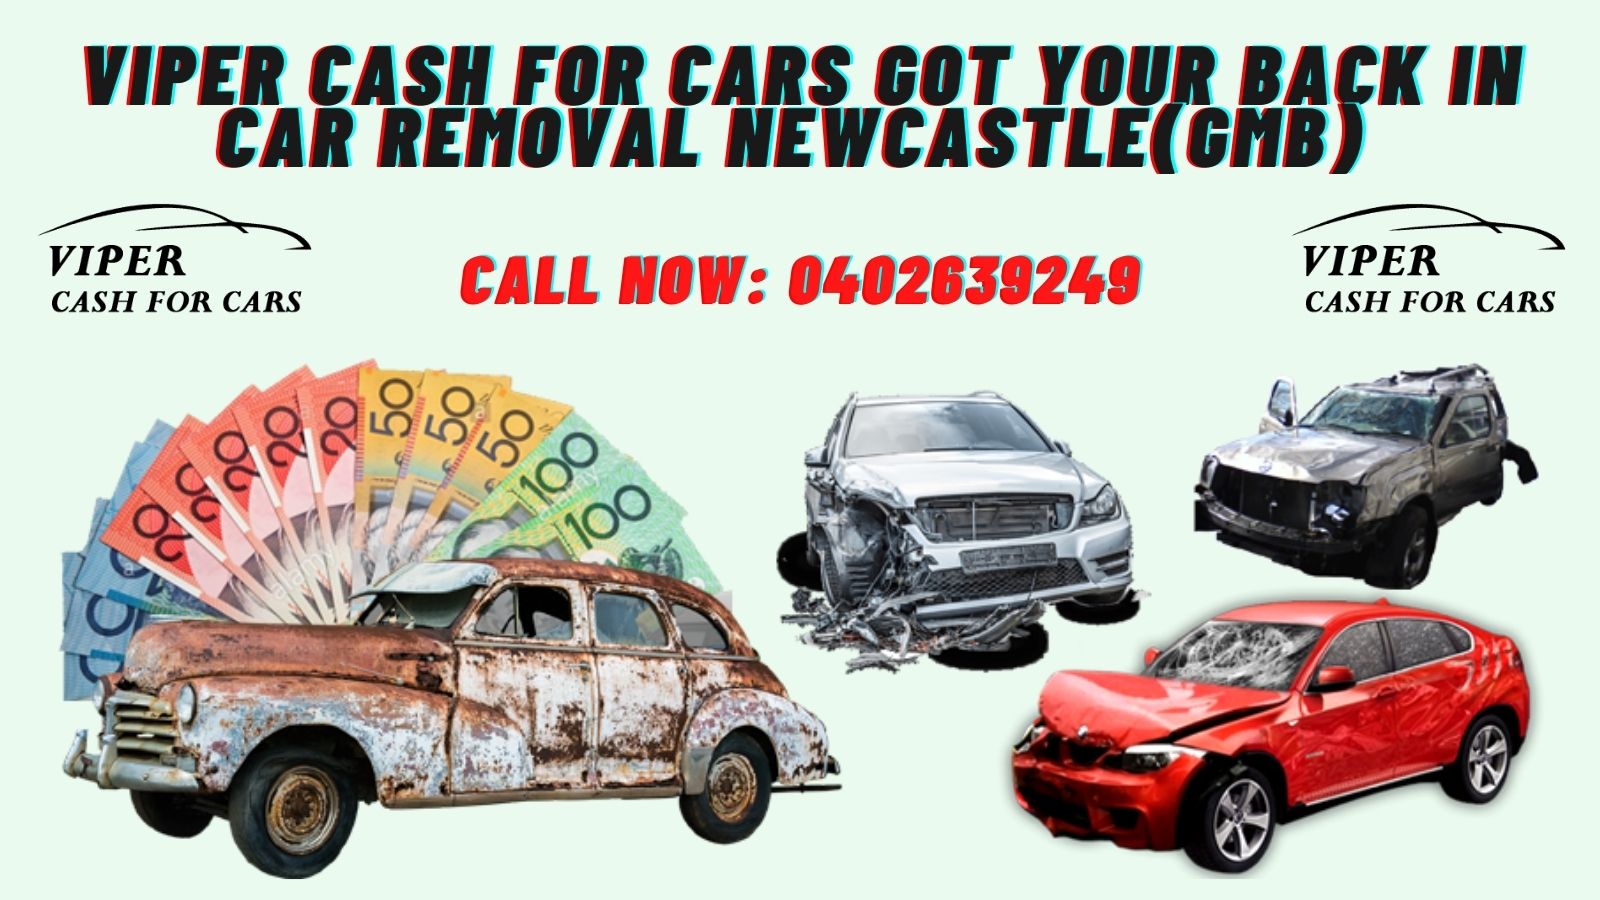 Viper Cash For Cars Got Your Back in Car Removal Newcastle(GMB)